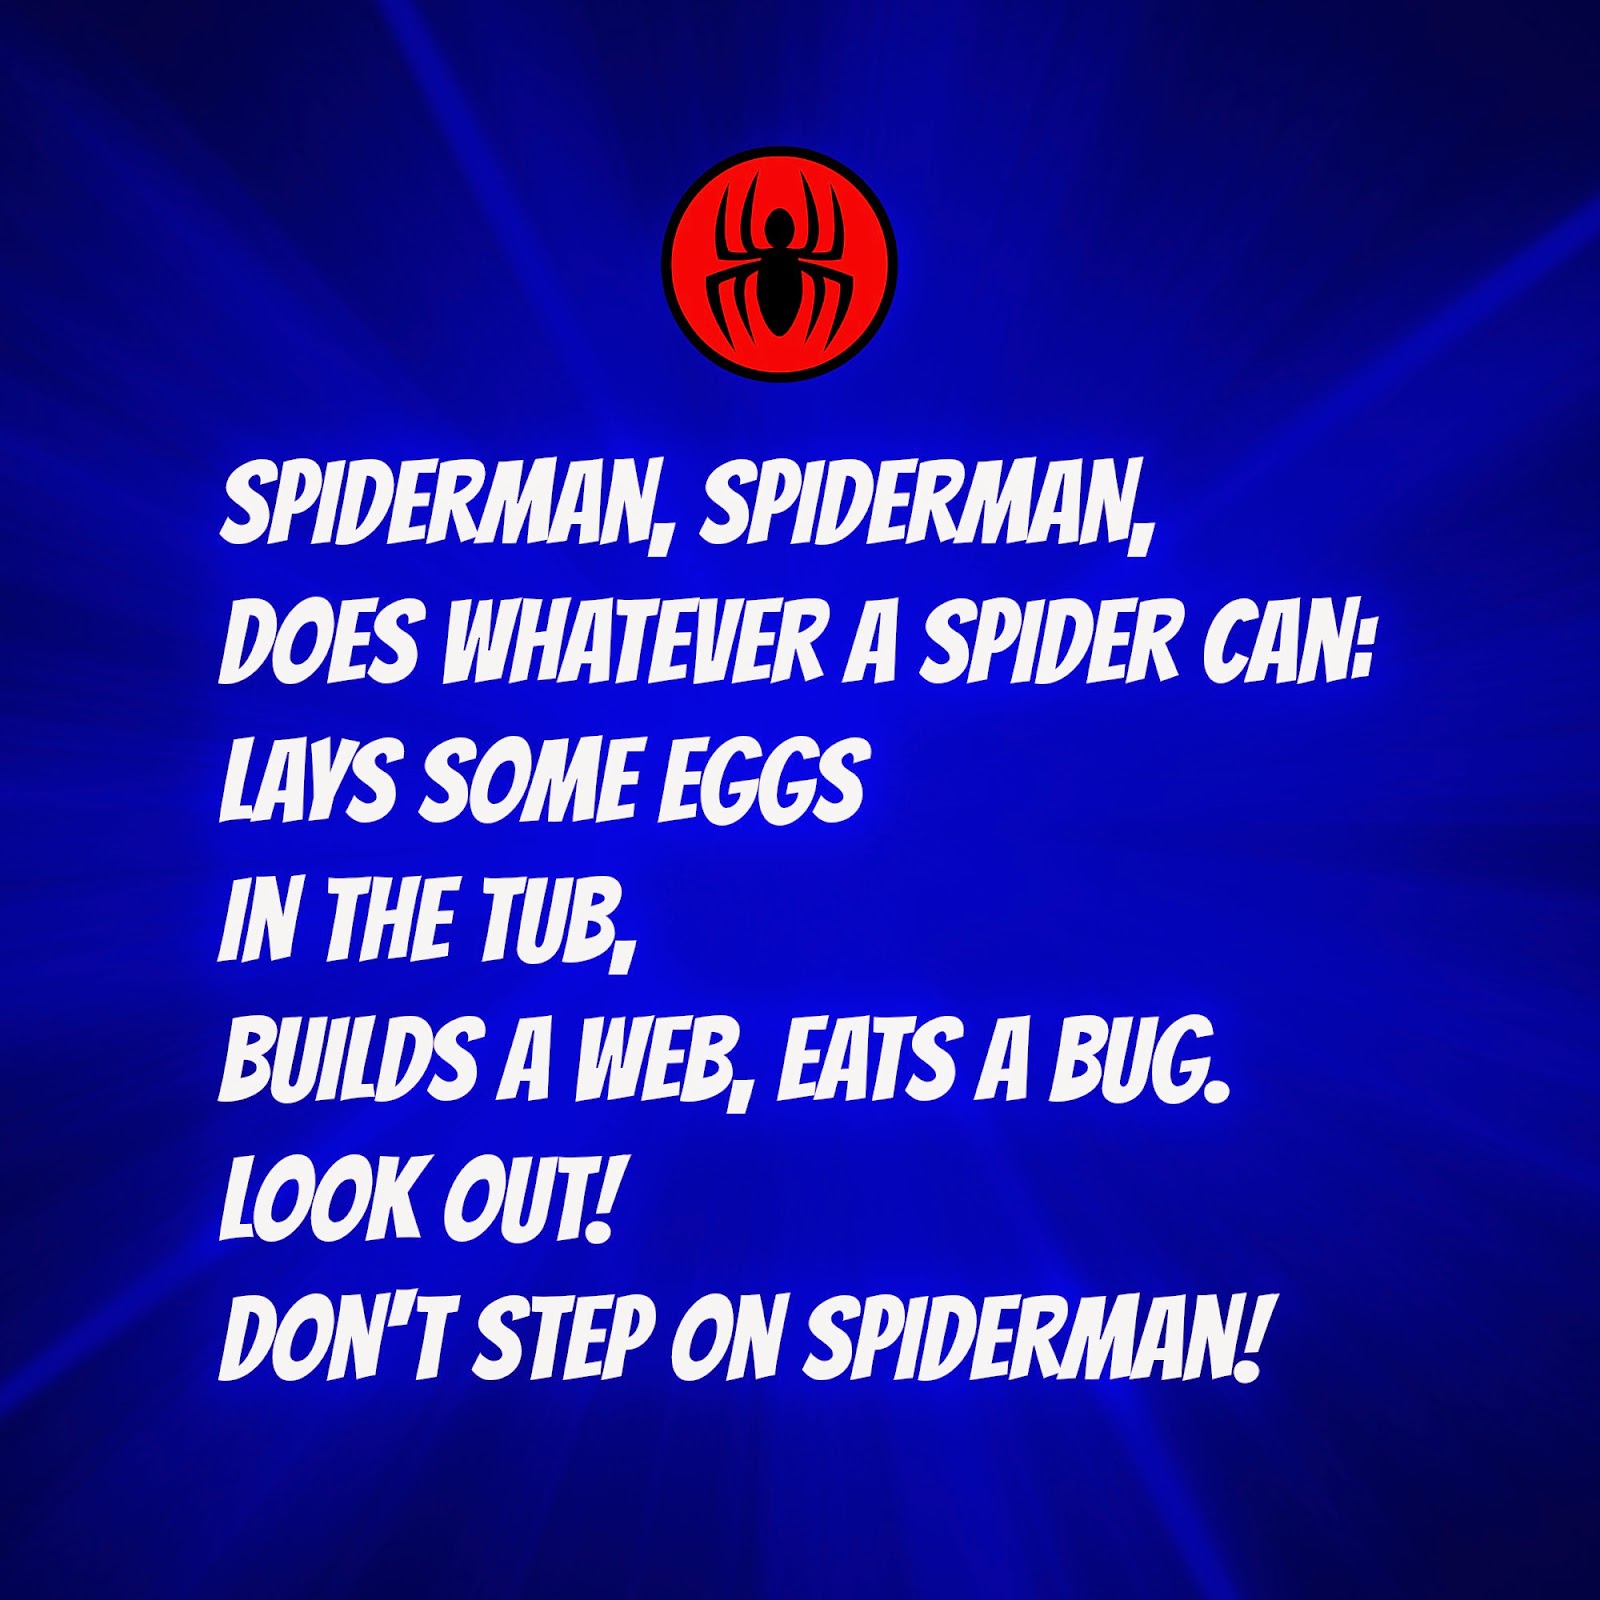 Spiderman theme song, revisited.